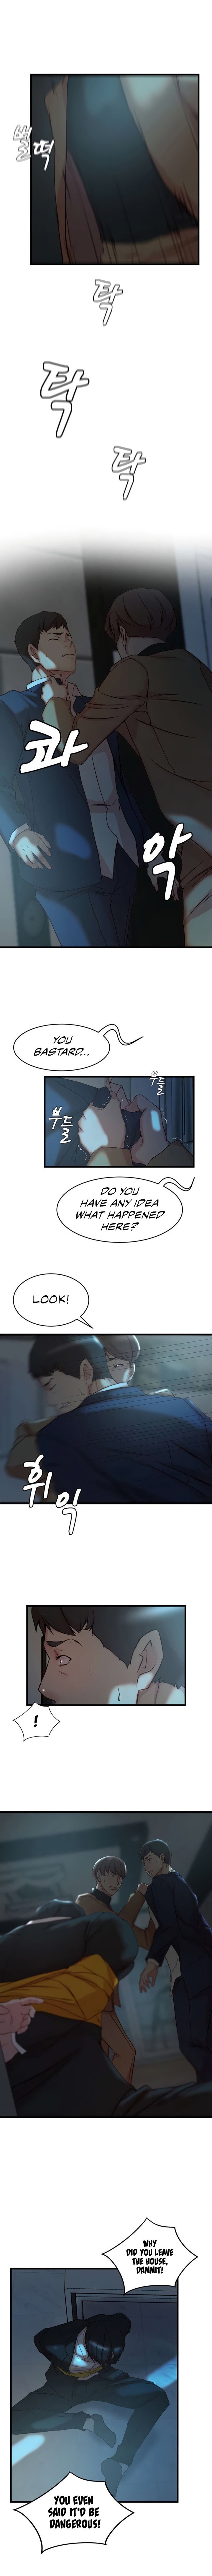 Sister-in-Law Manhwa - Chapter 37 Page 8